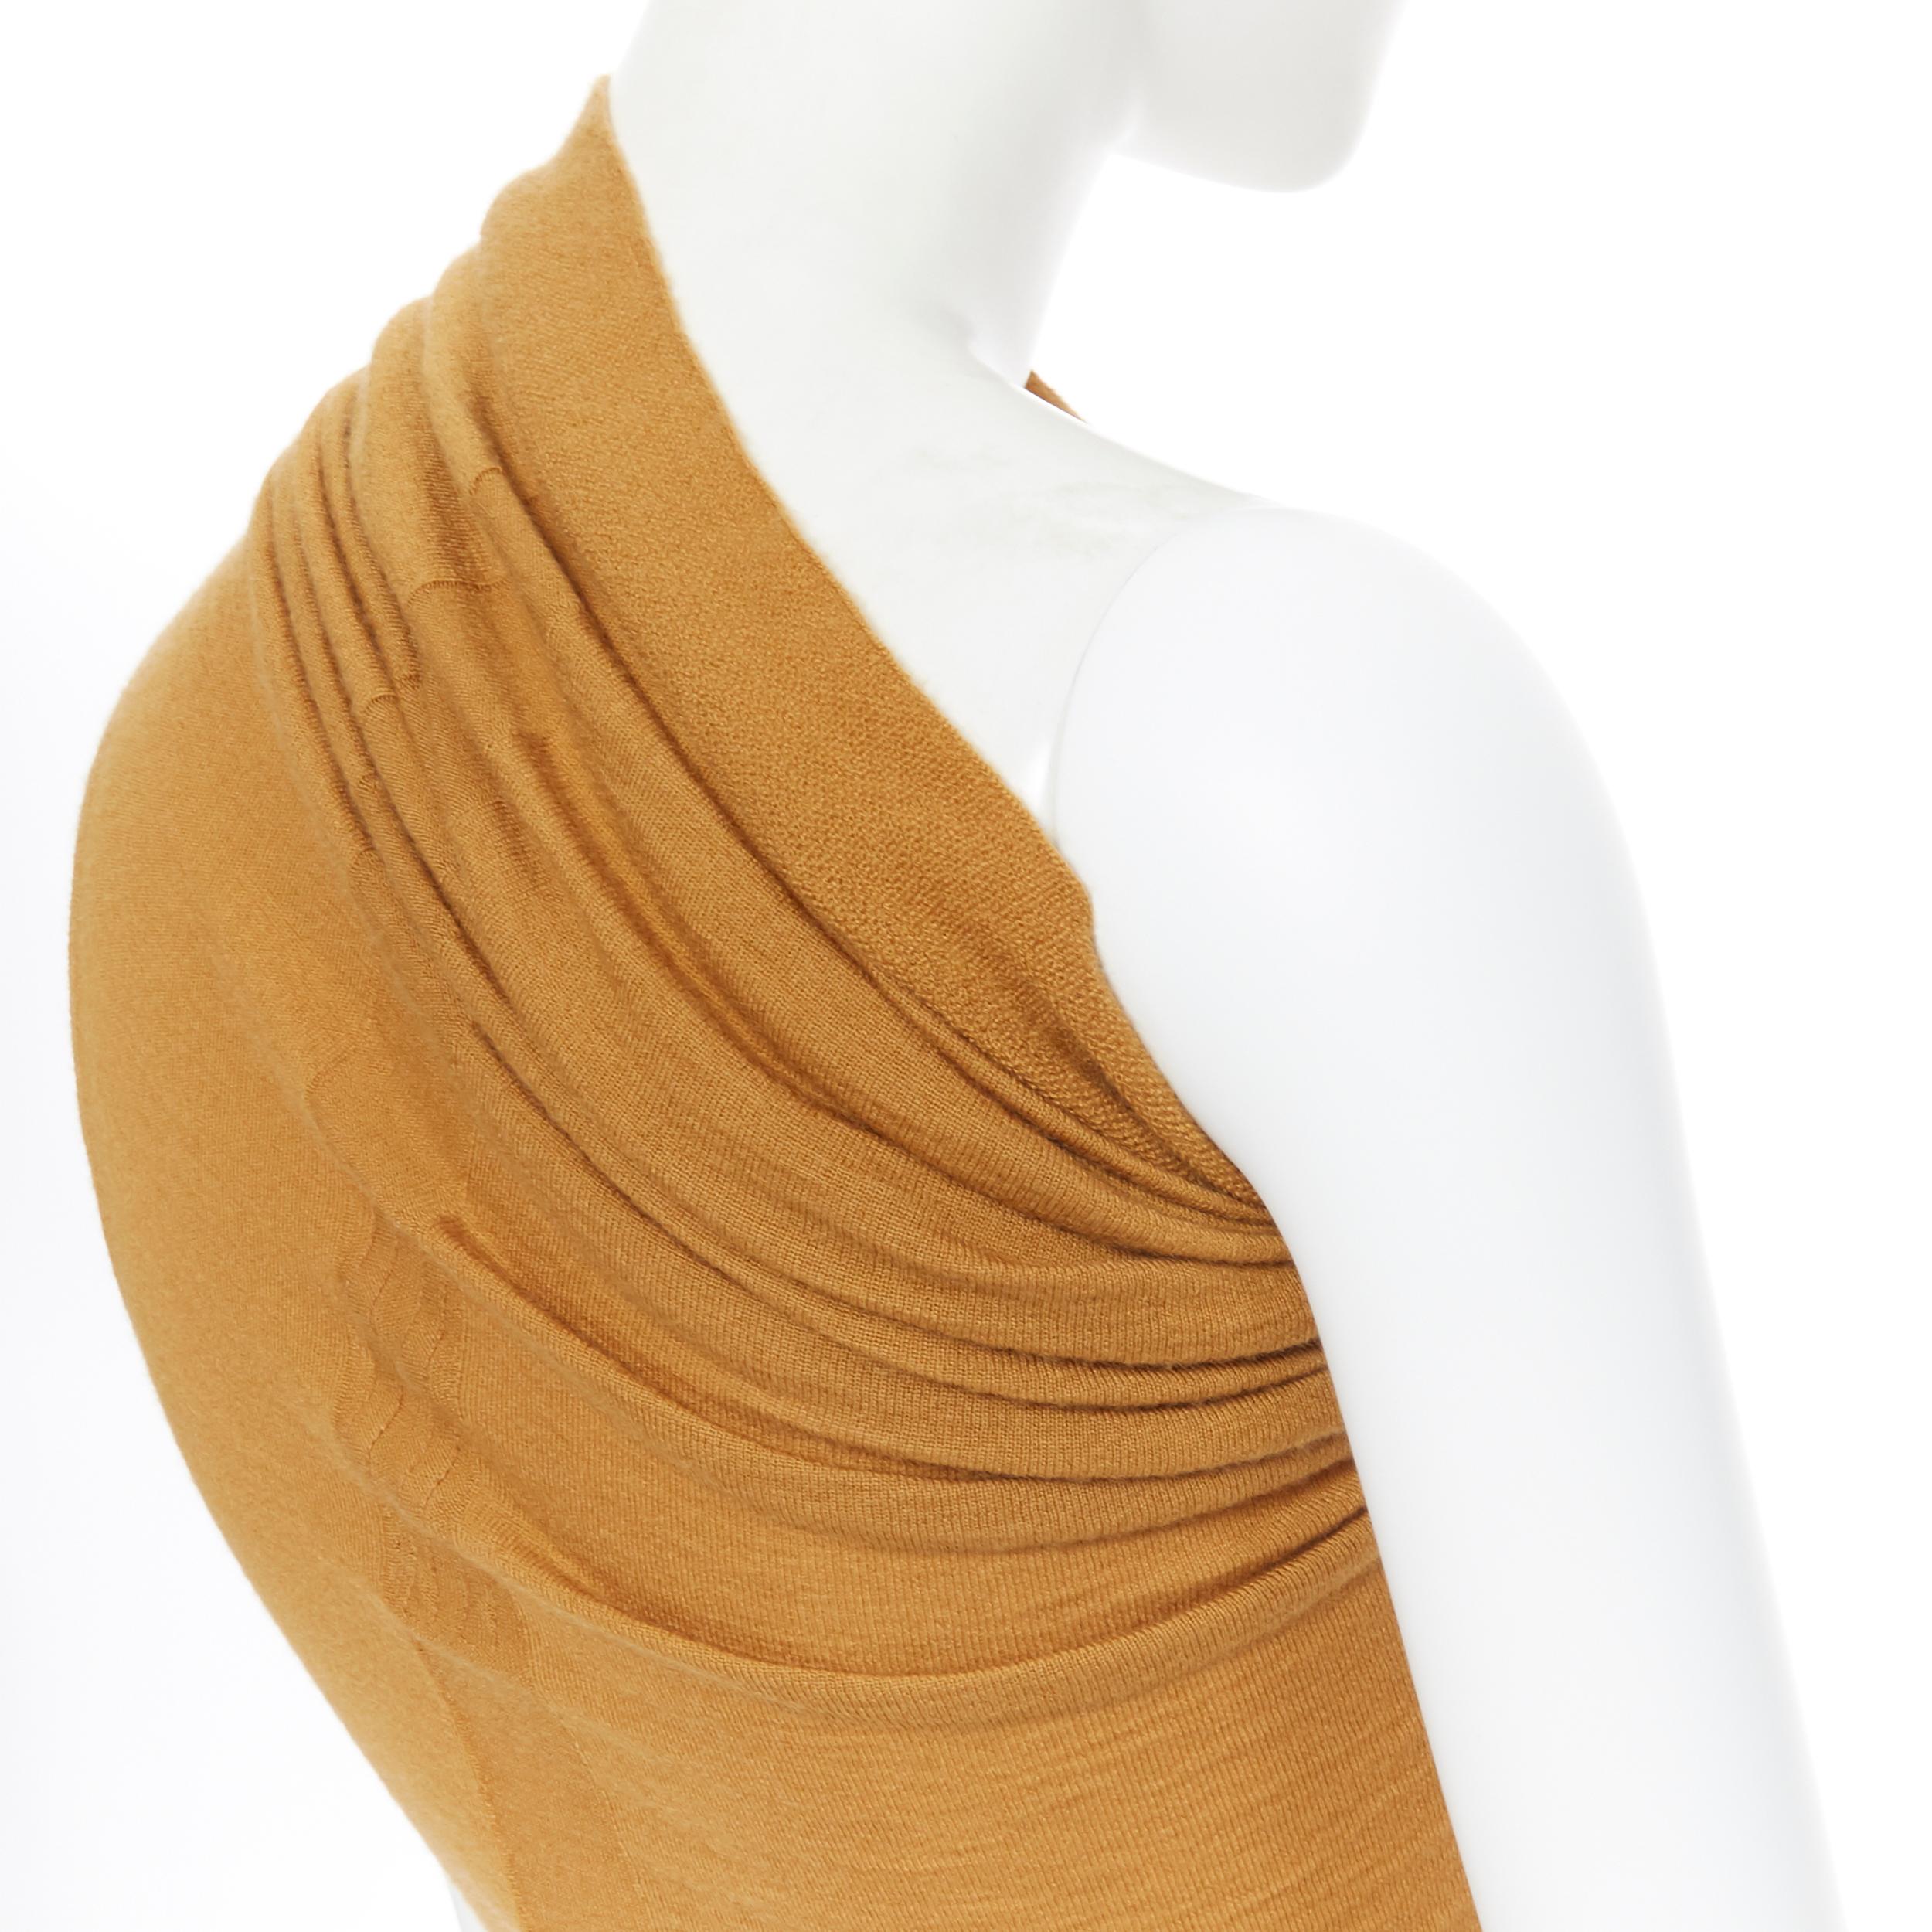 new RICK OWENS AW18 Runway mustard cashmere wool knit one shoulder top XS 5